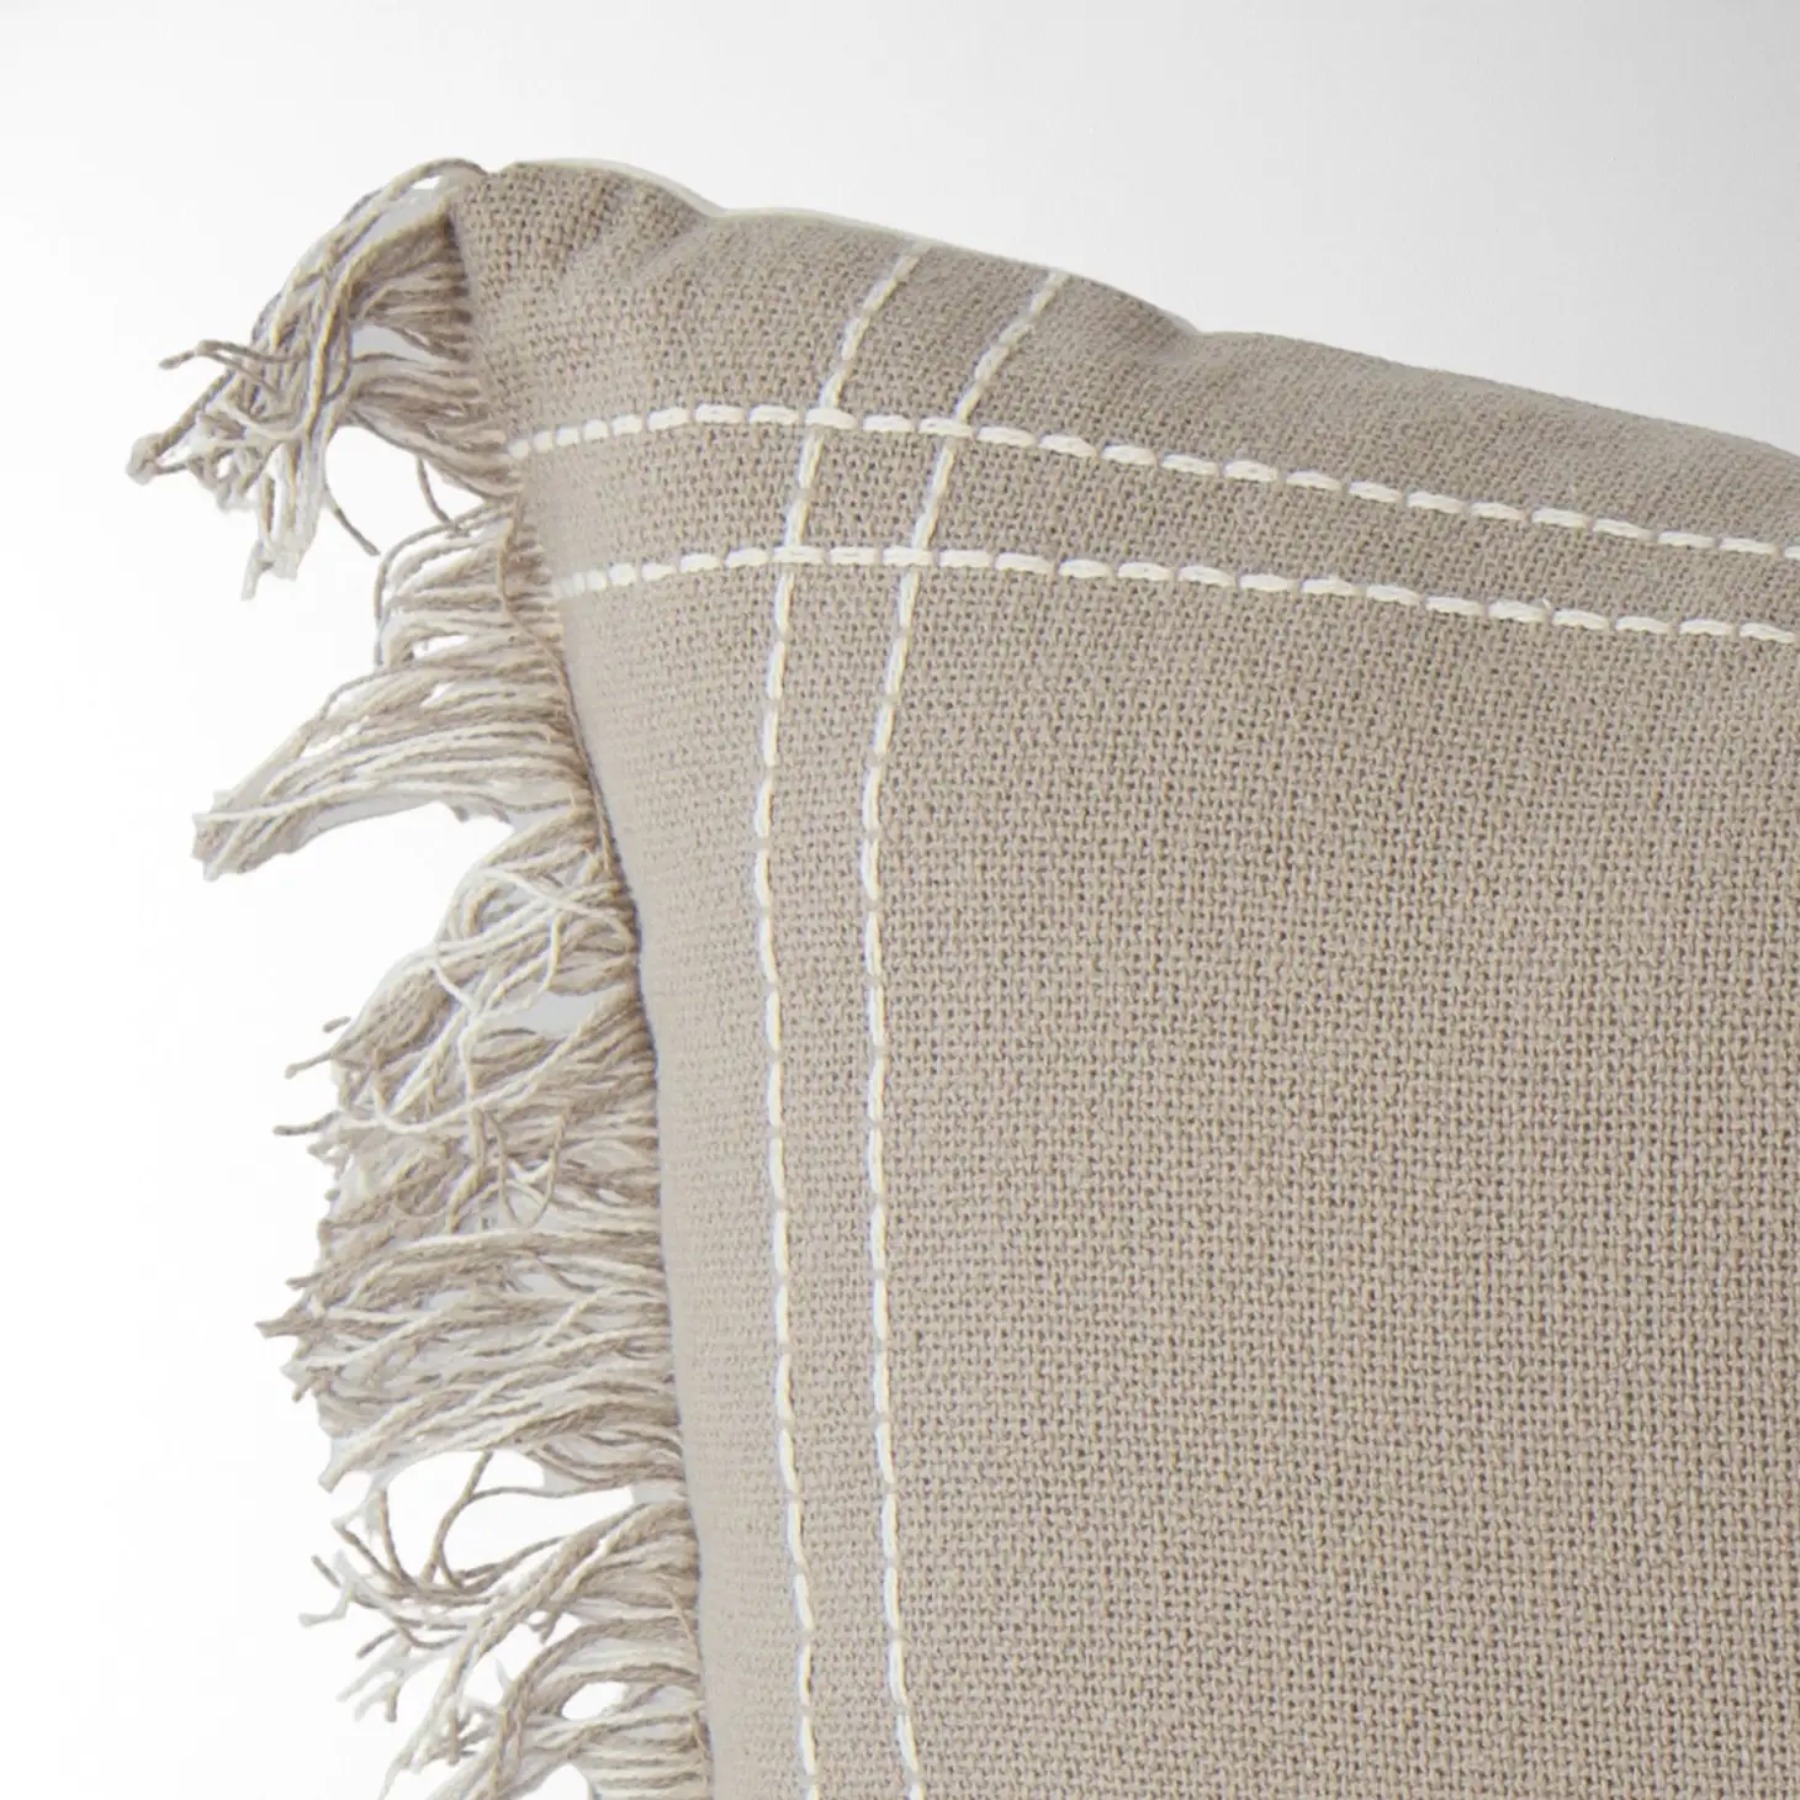 Crosshatch Pillow Cover - Taupe